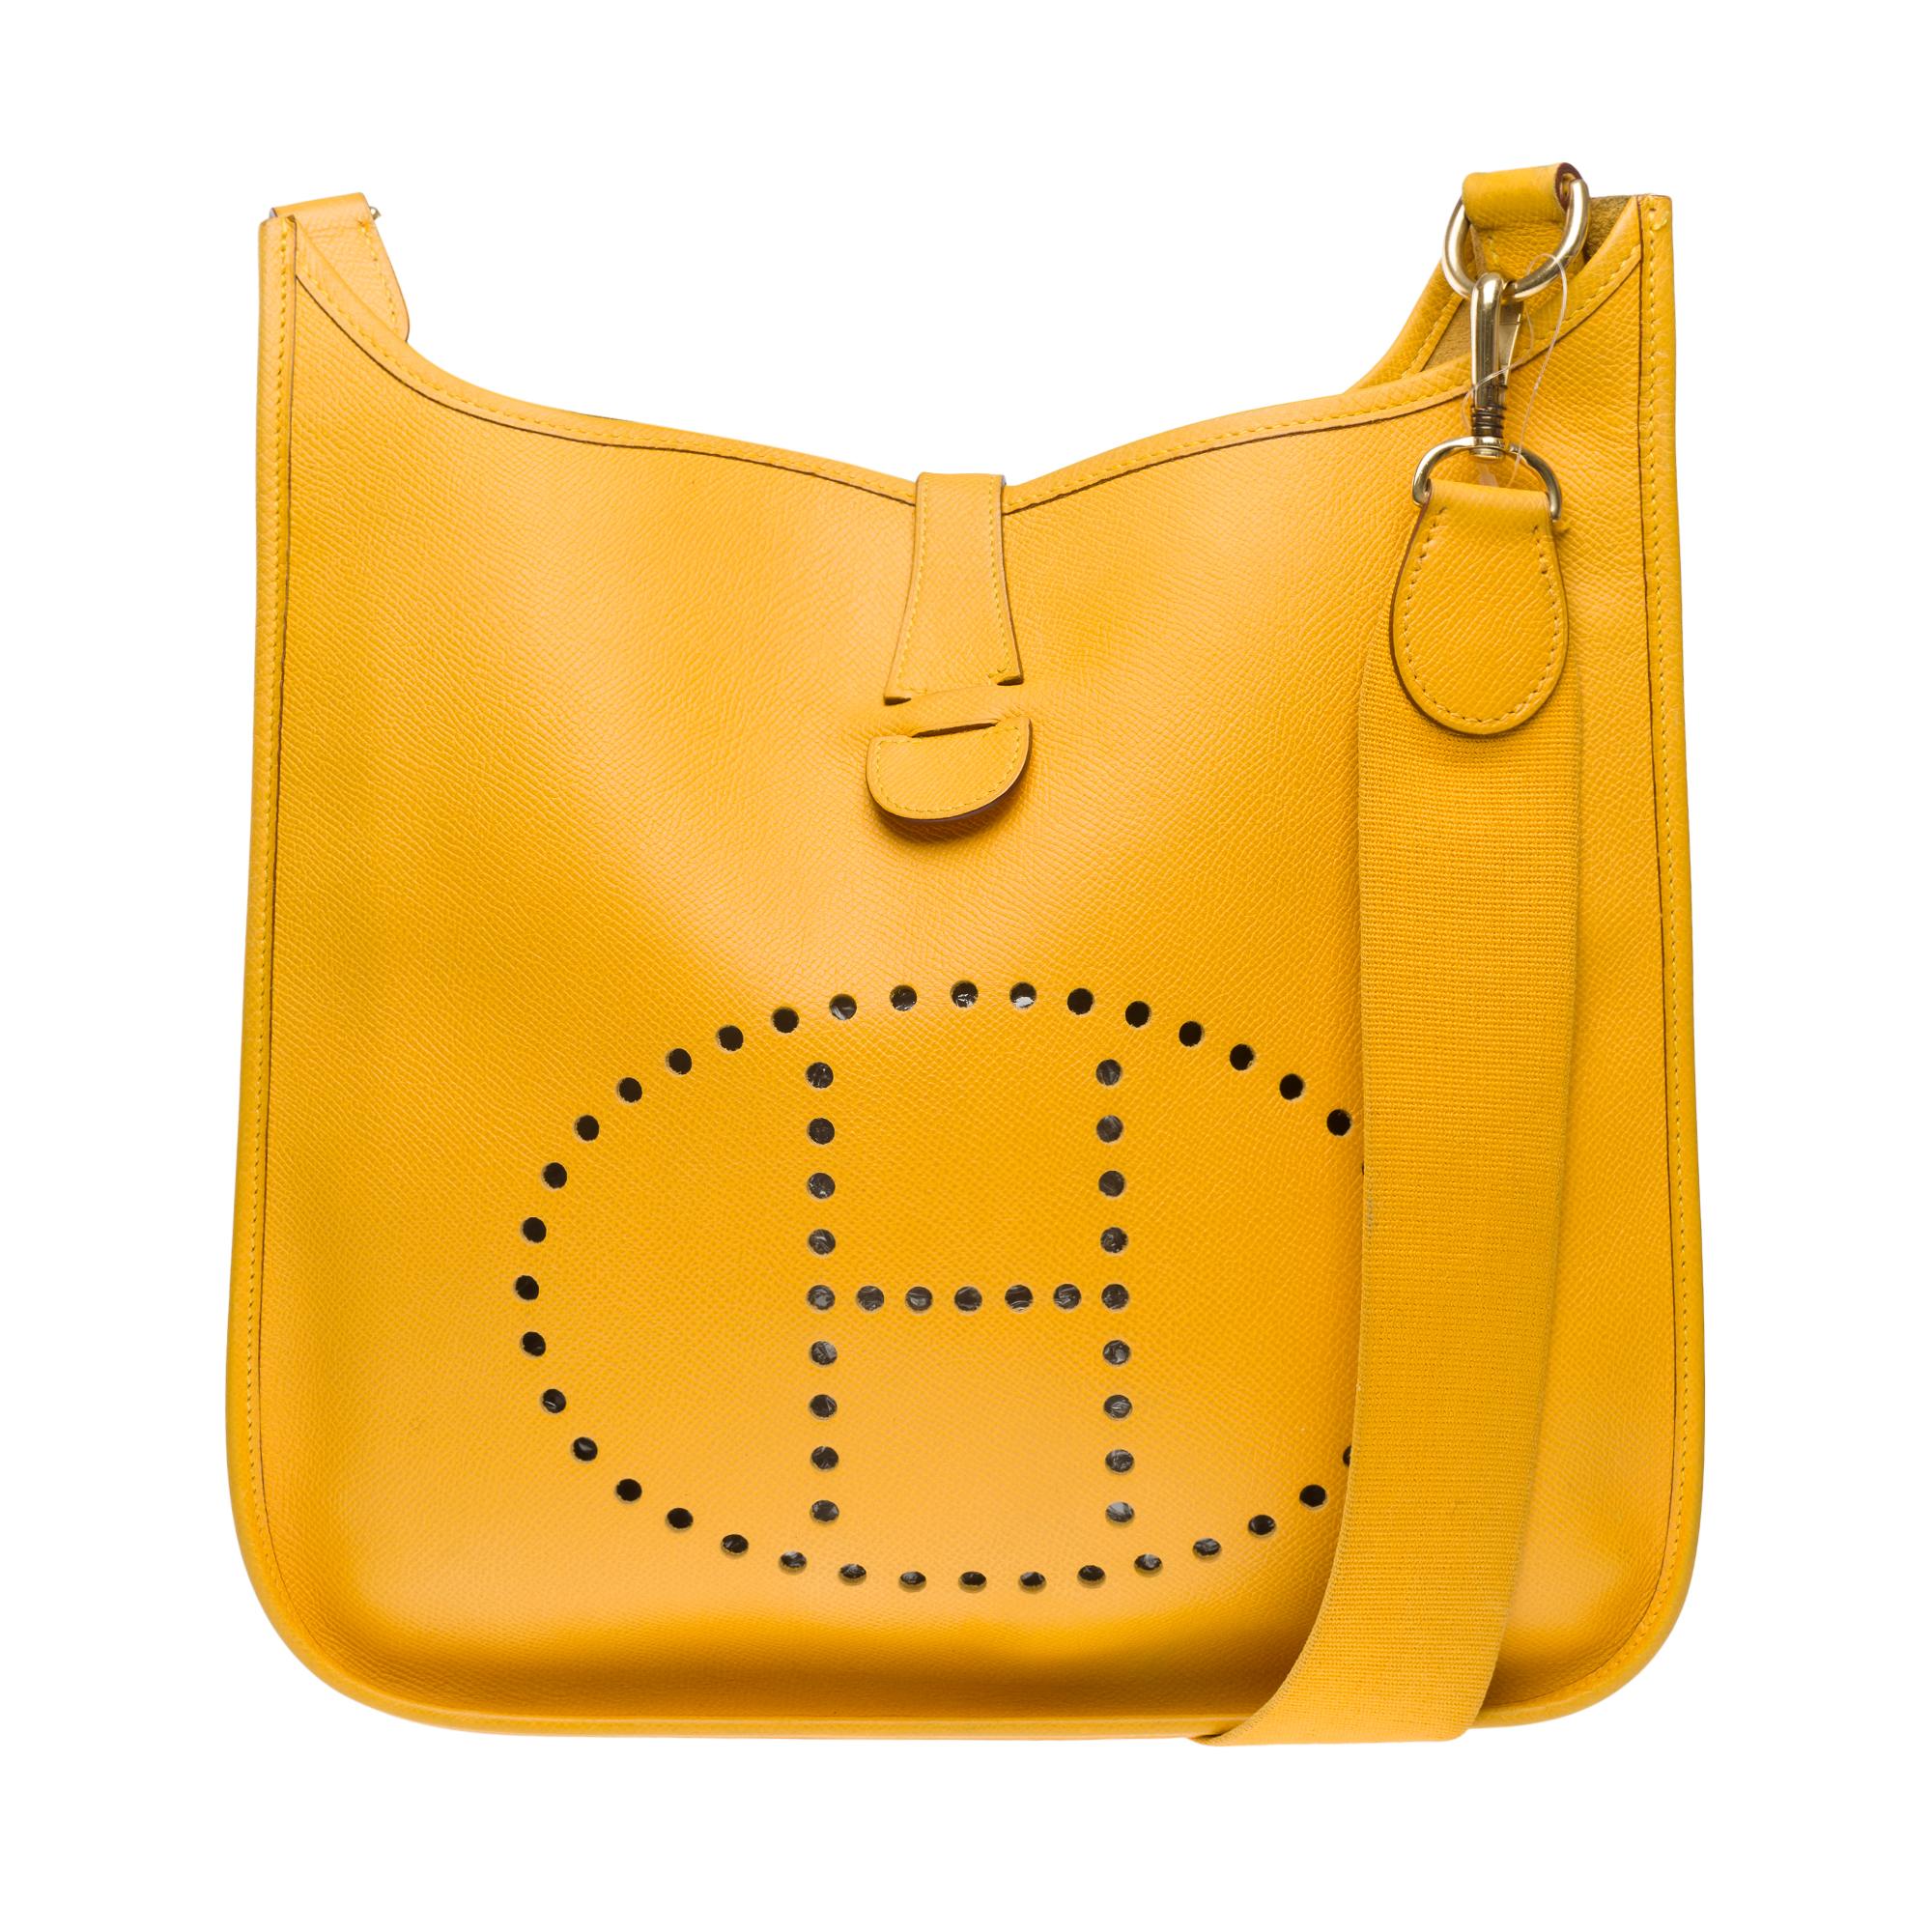 The​ ​Iconic​ ​Hermes​ ​Evelyne​ ​GM​ ​shoulder​ ​bag​ ​in​ ​Yellow​ ​gold​ ​(jaune​ ​d'or)​ ​Courchevel​ ​leather​ ​,​ ​gold​ ​metal​ ​trim,​ ​a​ ​removable​ ​shoulder​ ​strap​ ​in​ ​yellow​ ​canvas​ ​allowing​ ​a​ ​shoulder​ ​or​ ​crossbody​